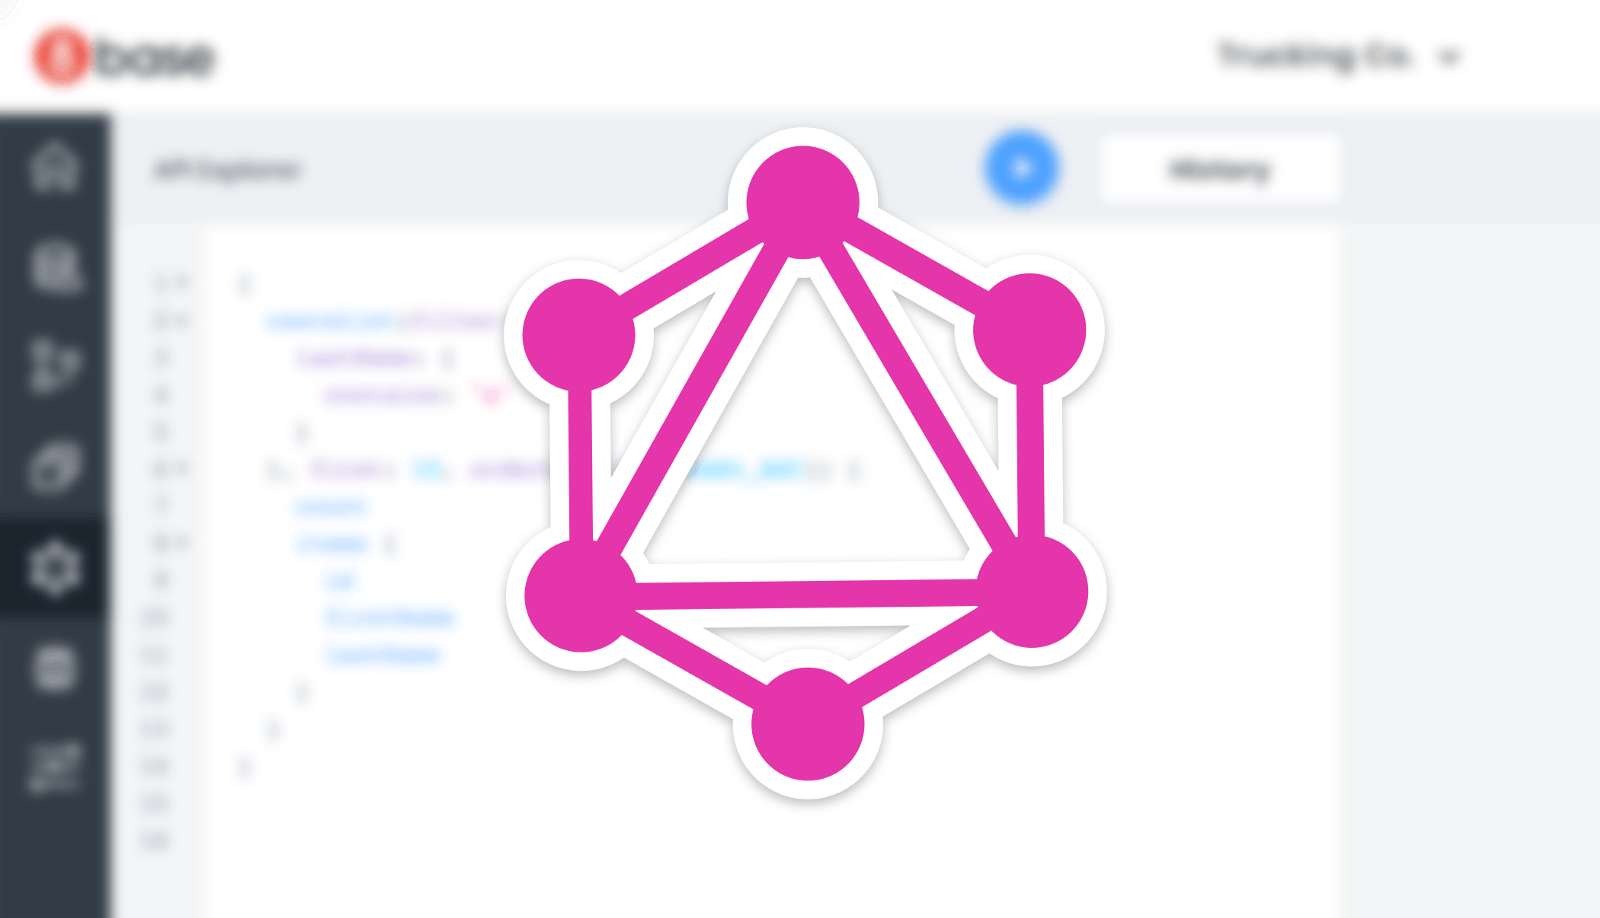 /whether-you-love-or-hate-facebook-graphql-is-awesome-bbf67f33fe10 feature image